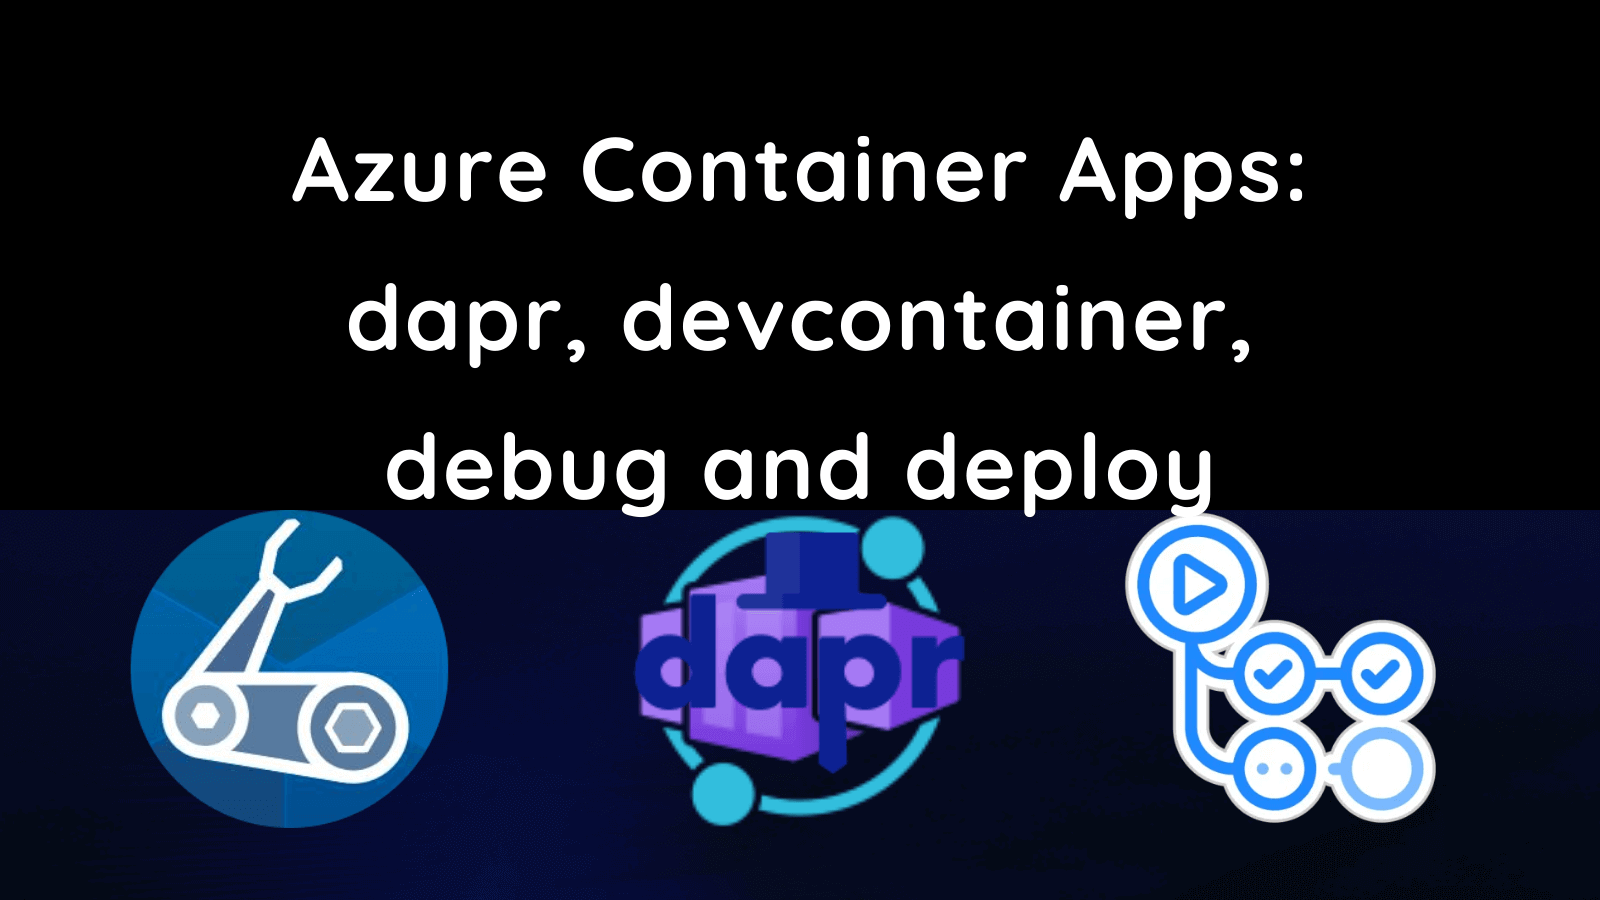 title image reading &quot;Azure Container Apps dapr, devcontainer, debug and deploy&quot;  with the dapr, Bicep, Azure Container Apps and GitHub Actions logos